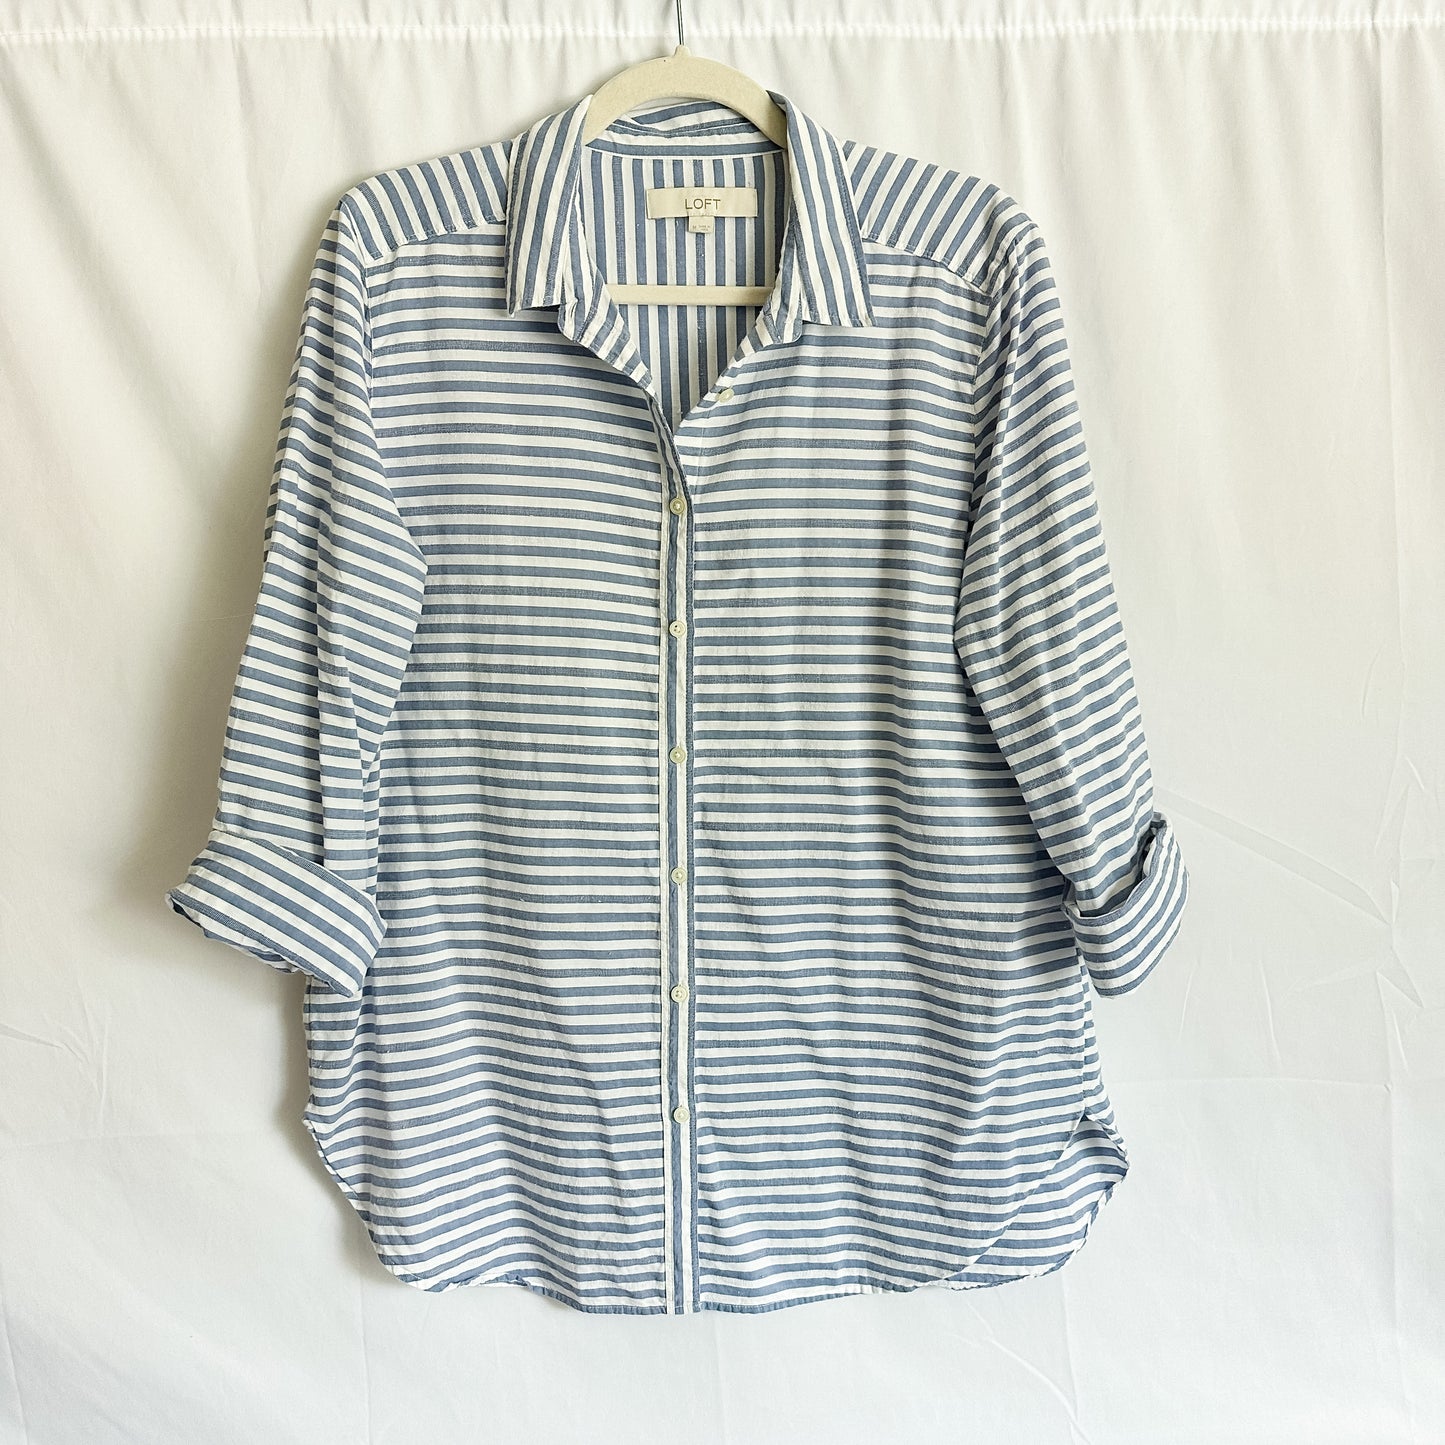 Striped Tunic Length Button Down Top (fits S-M)